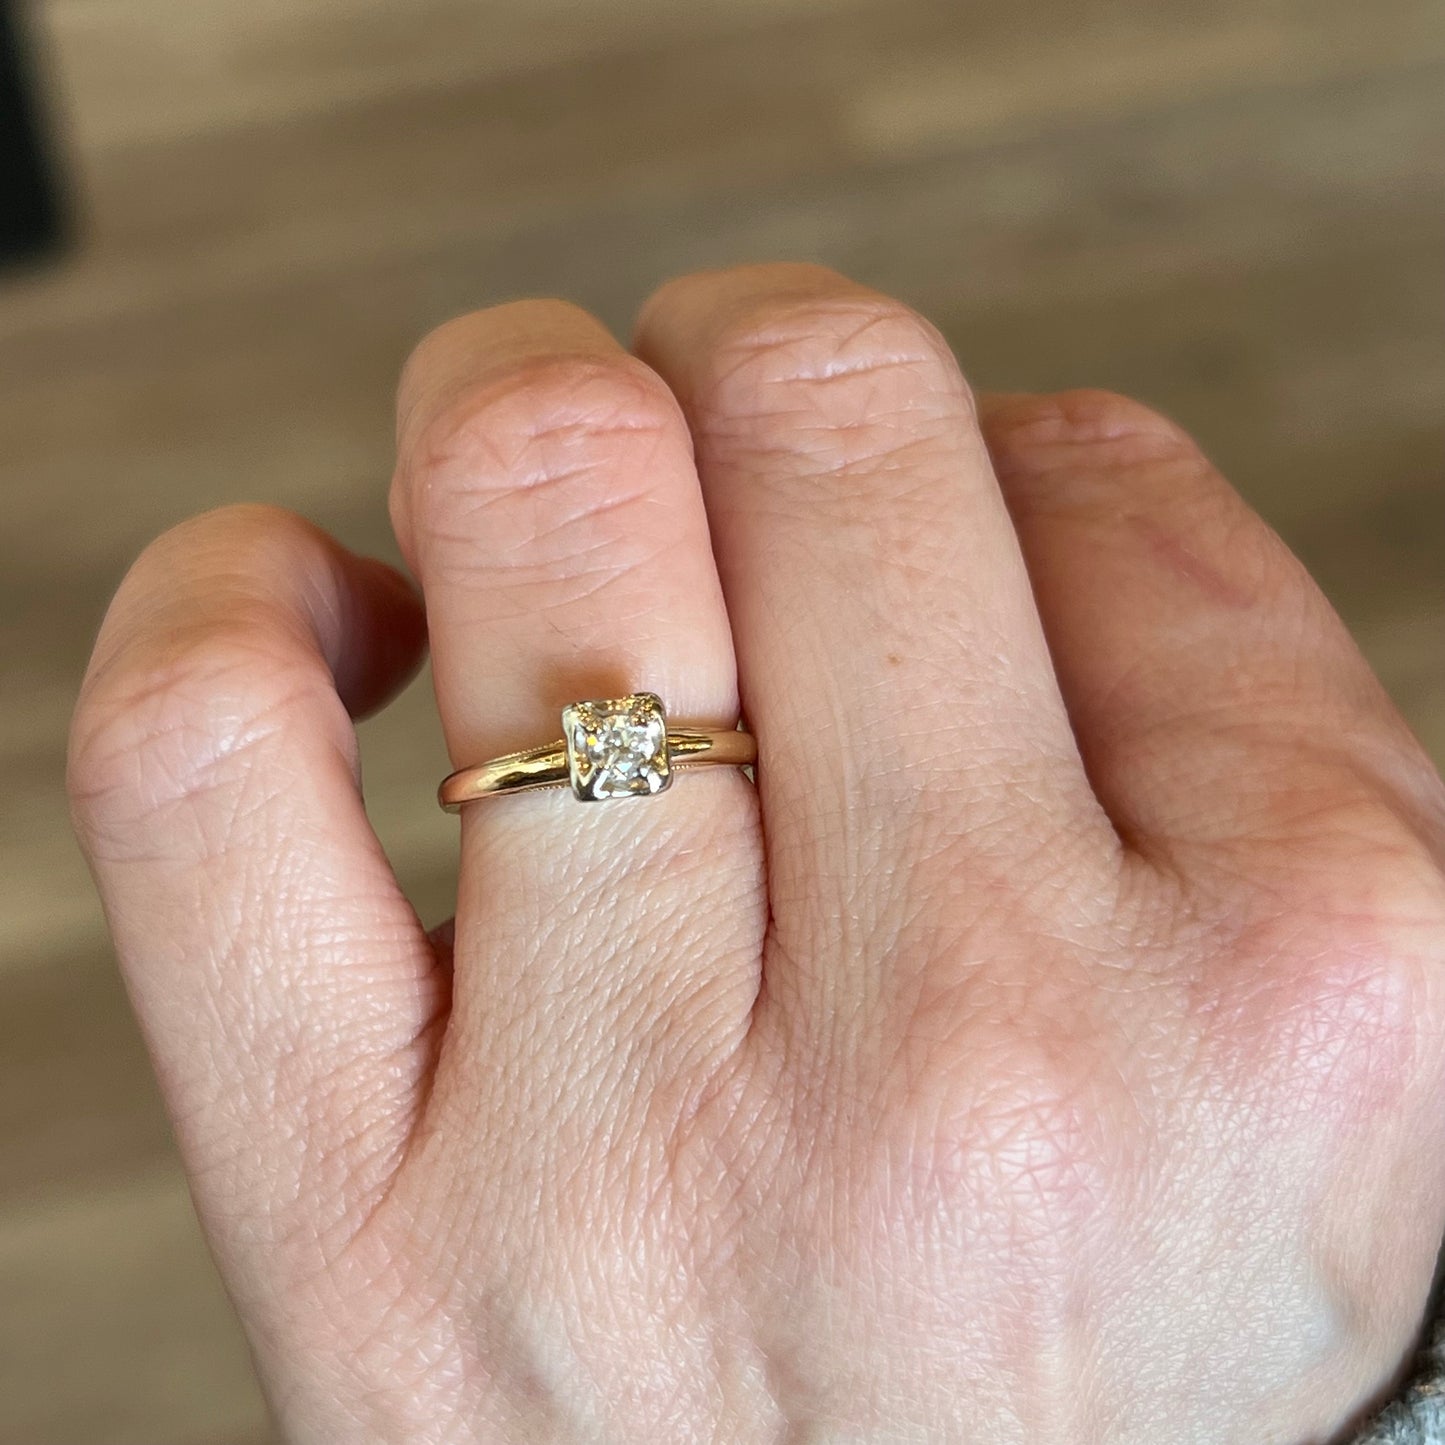 .20 Retro Solitaire Diamond Engagement Ring in 14k Gold